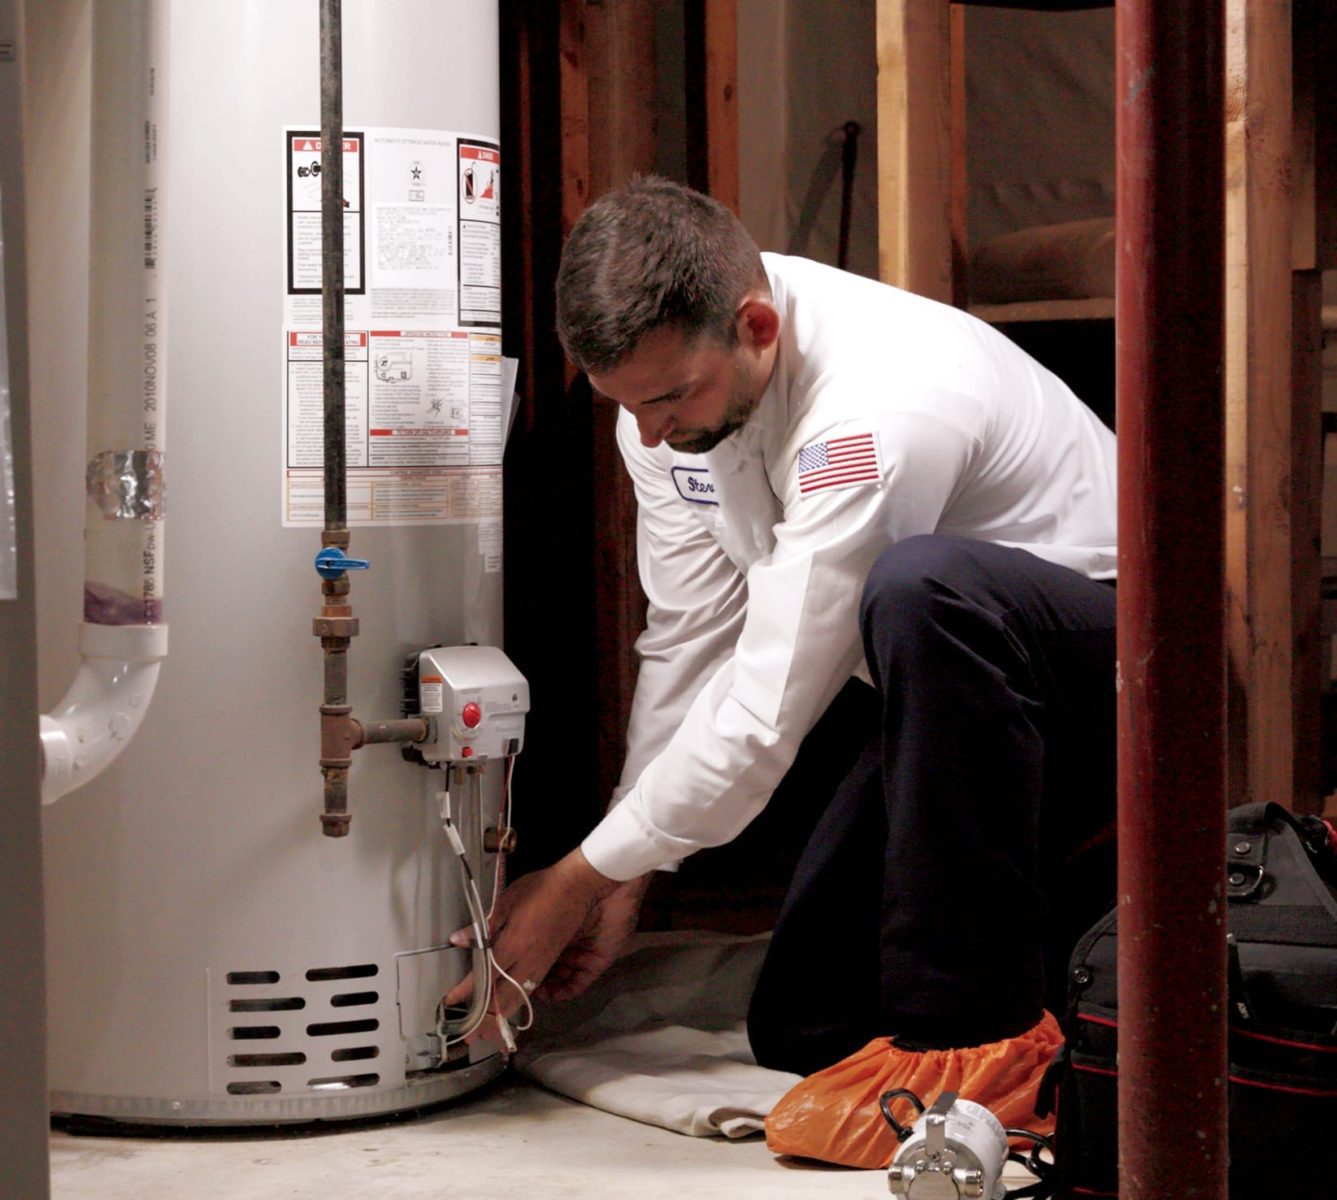 WATER HEATER TIPS AND TRICKS